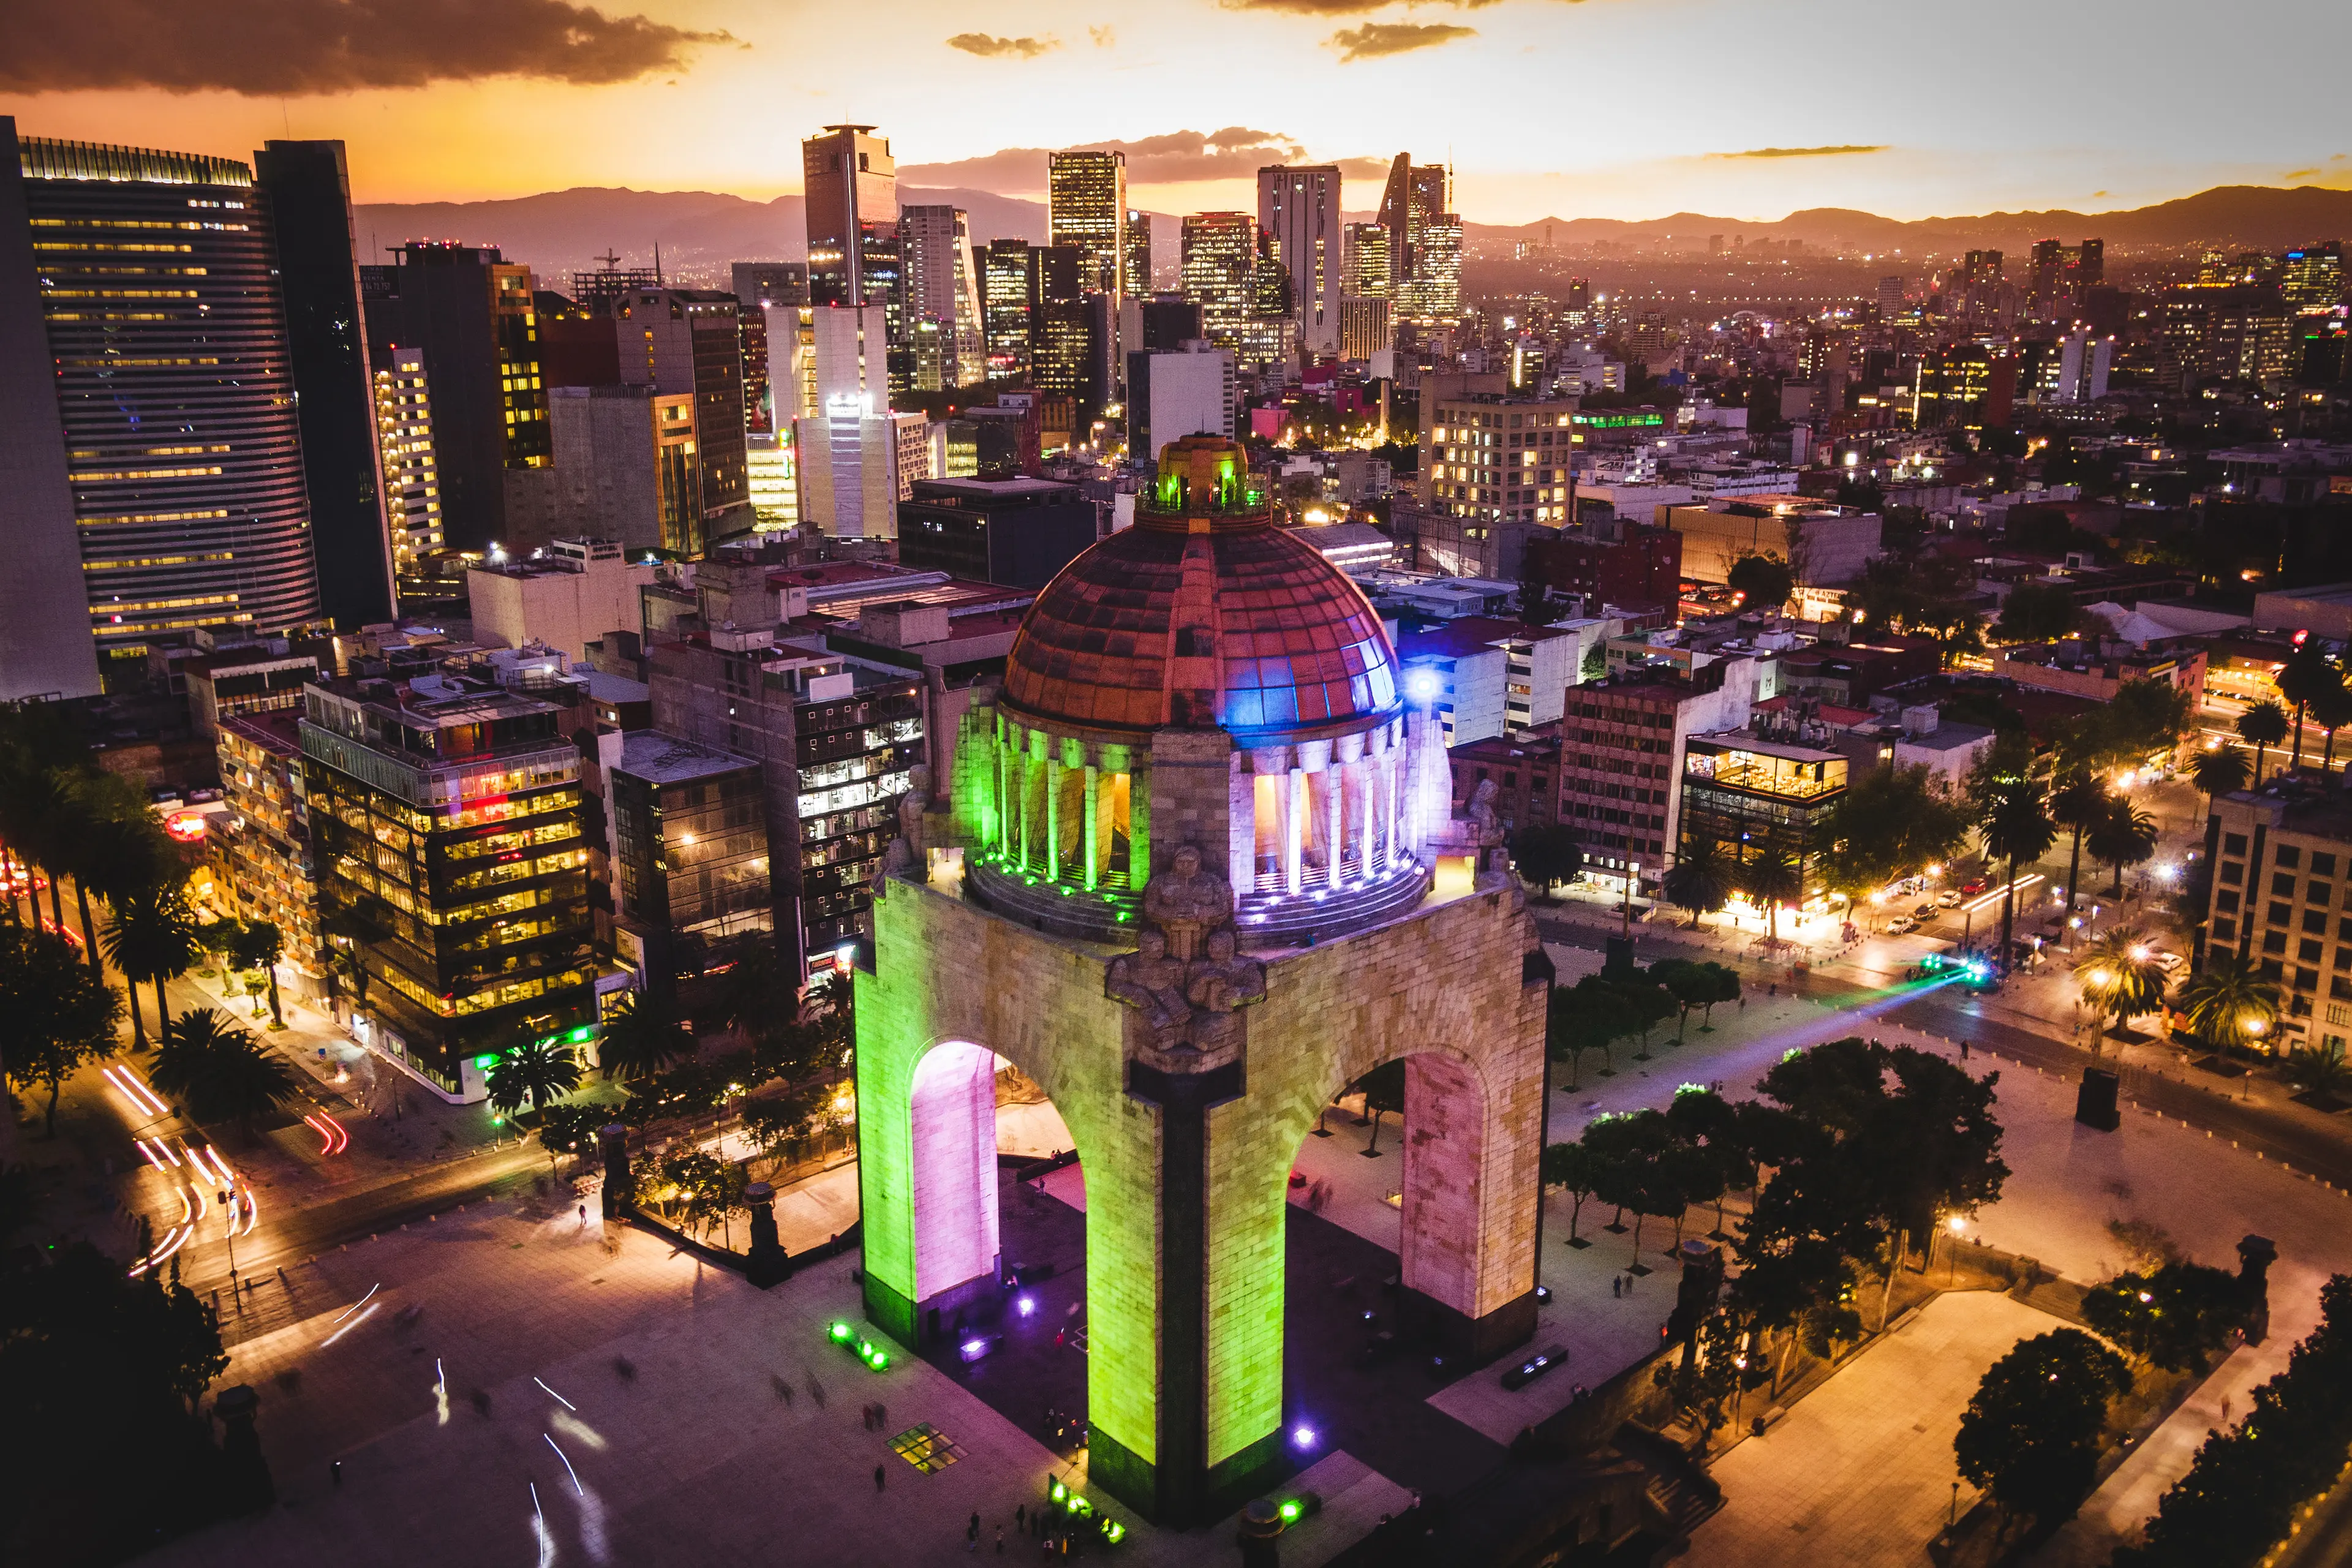 3-Day Mexico City Adventure: Sightseeing, Outdoors & Nightlife with Friends